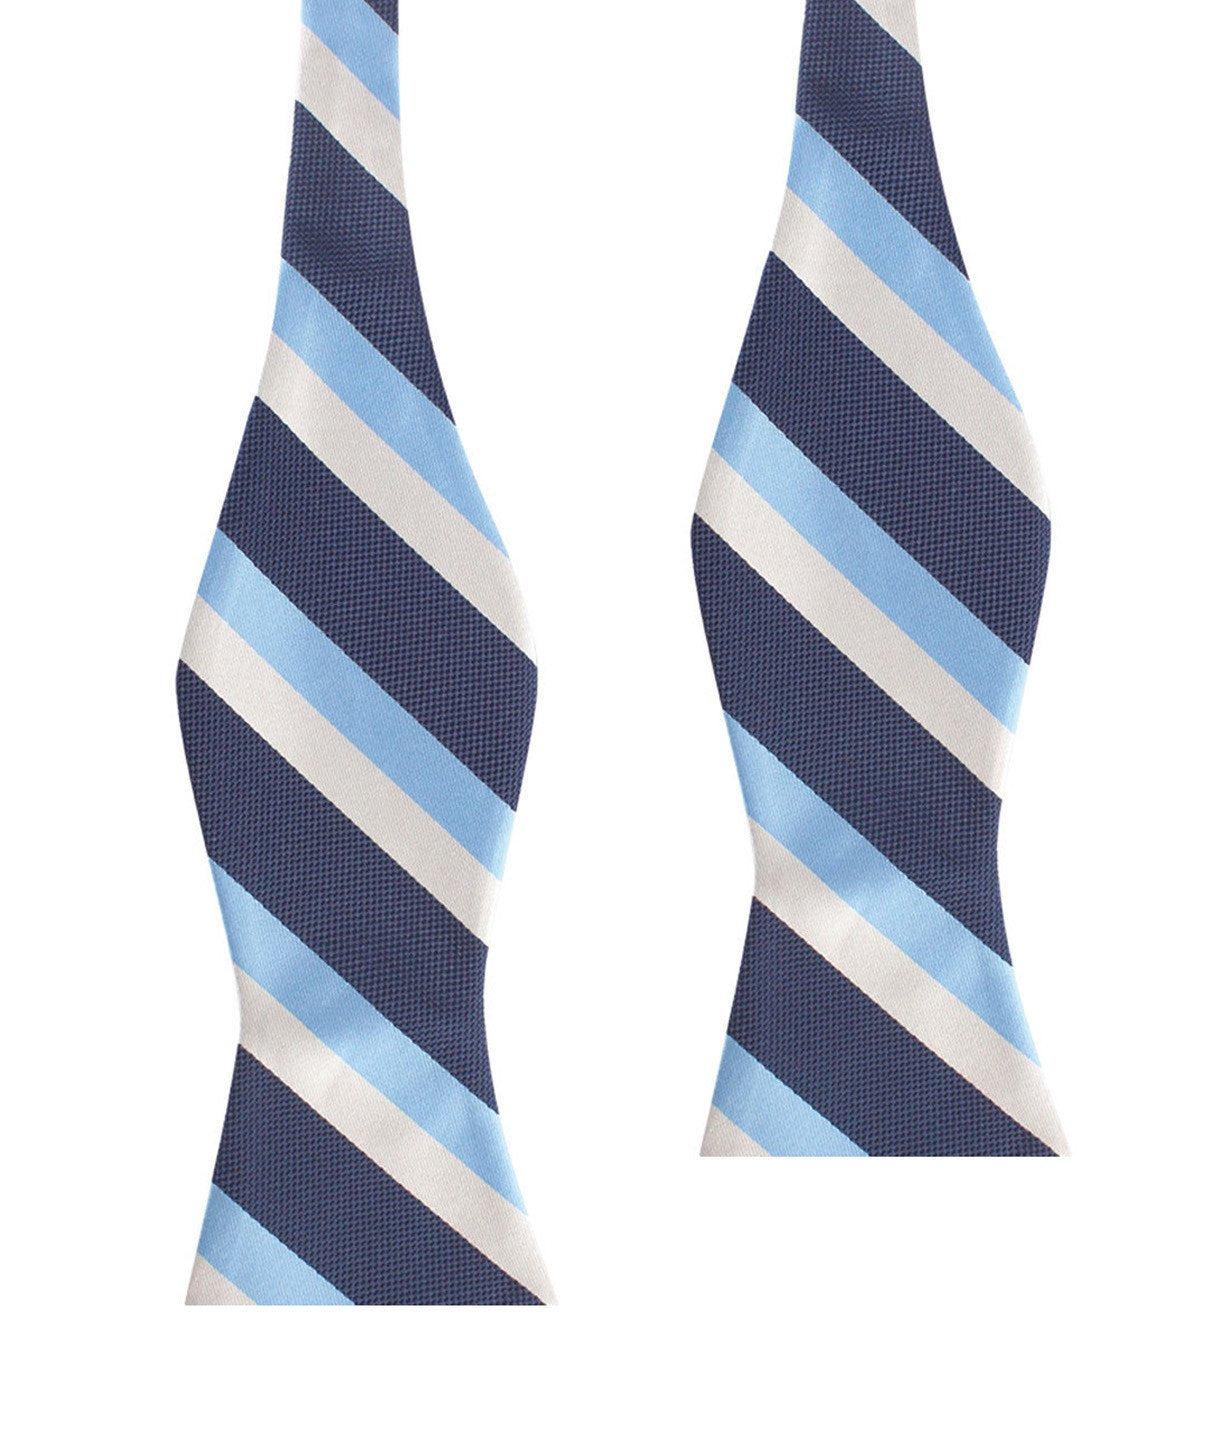 Striped Bow Ties - Top bow ties with stripes